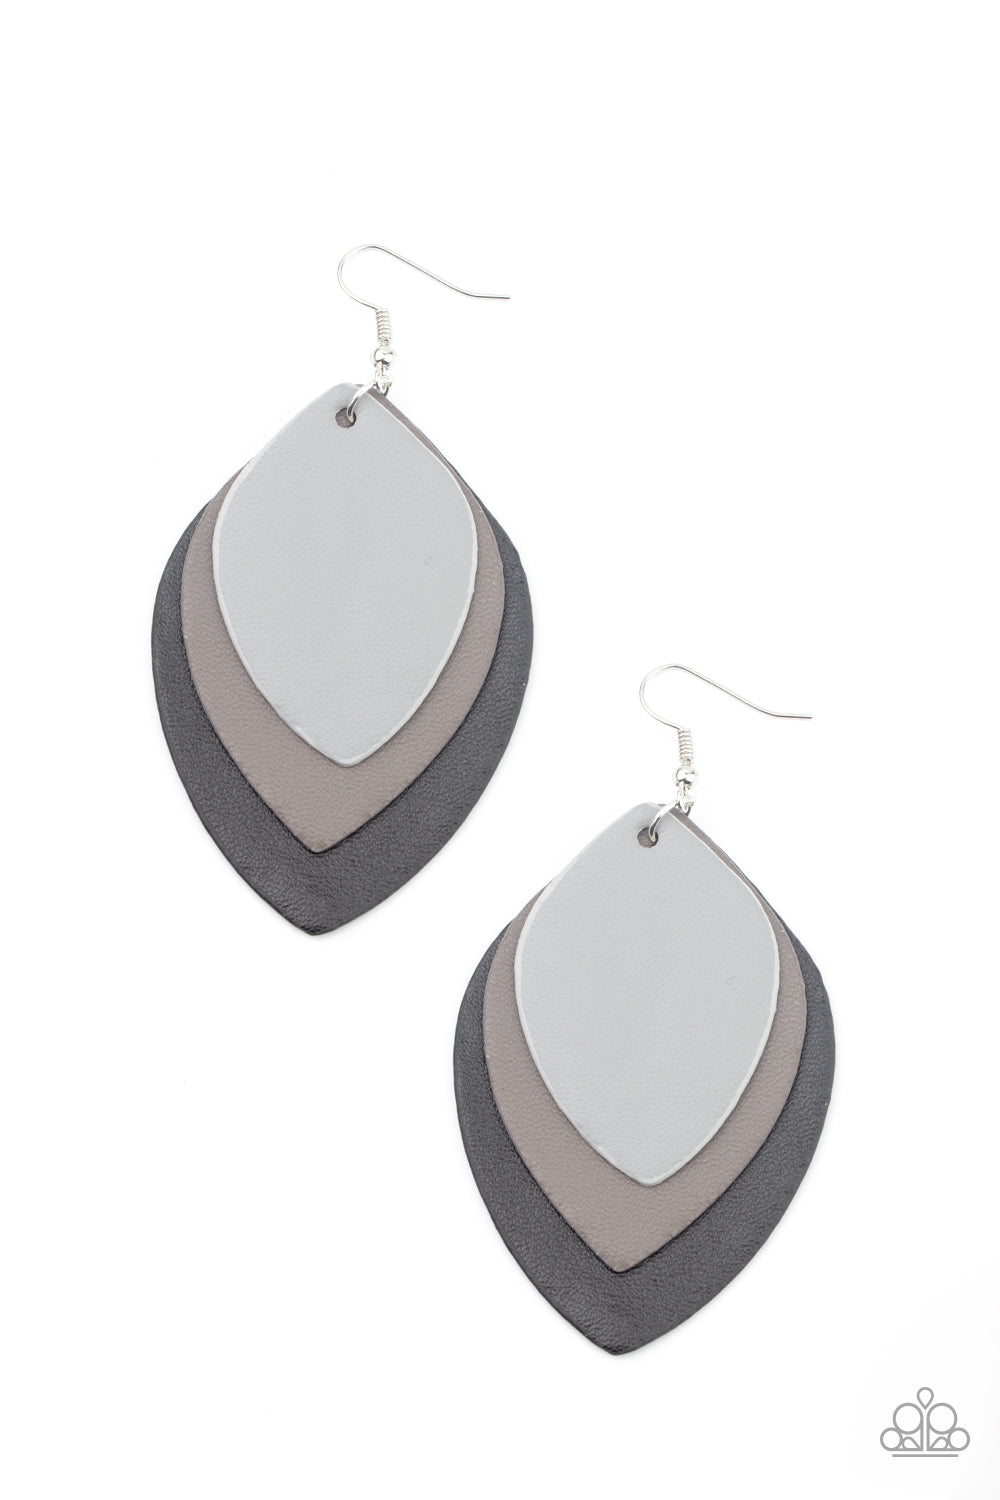 Paparazzi Light as a LEATHER - Black Earrings - A Finishing Touch Jewelry